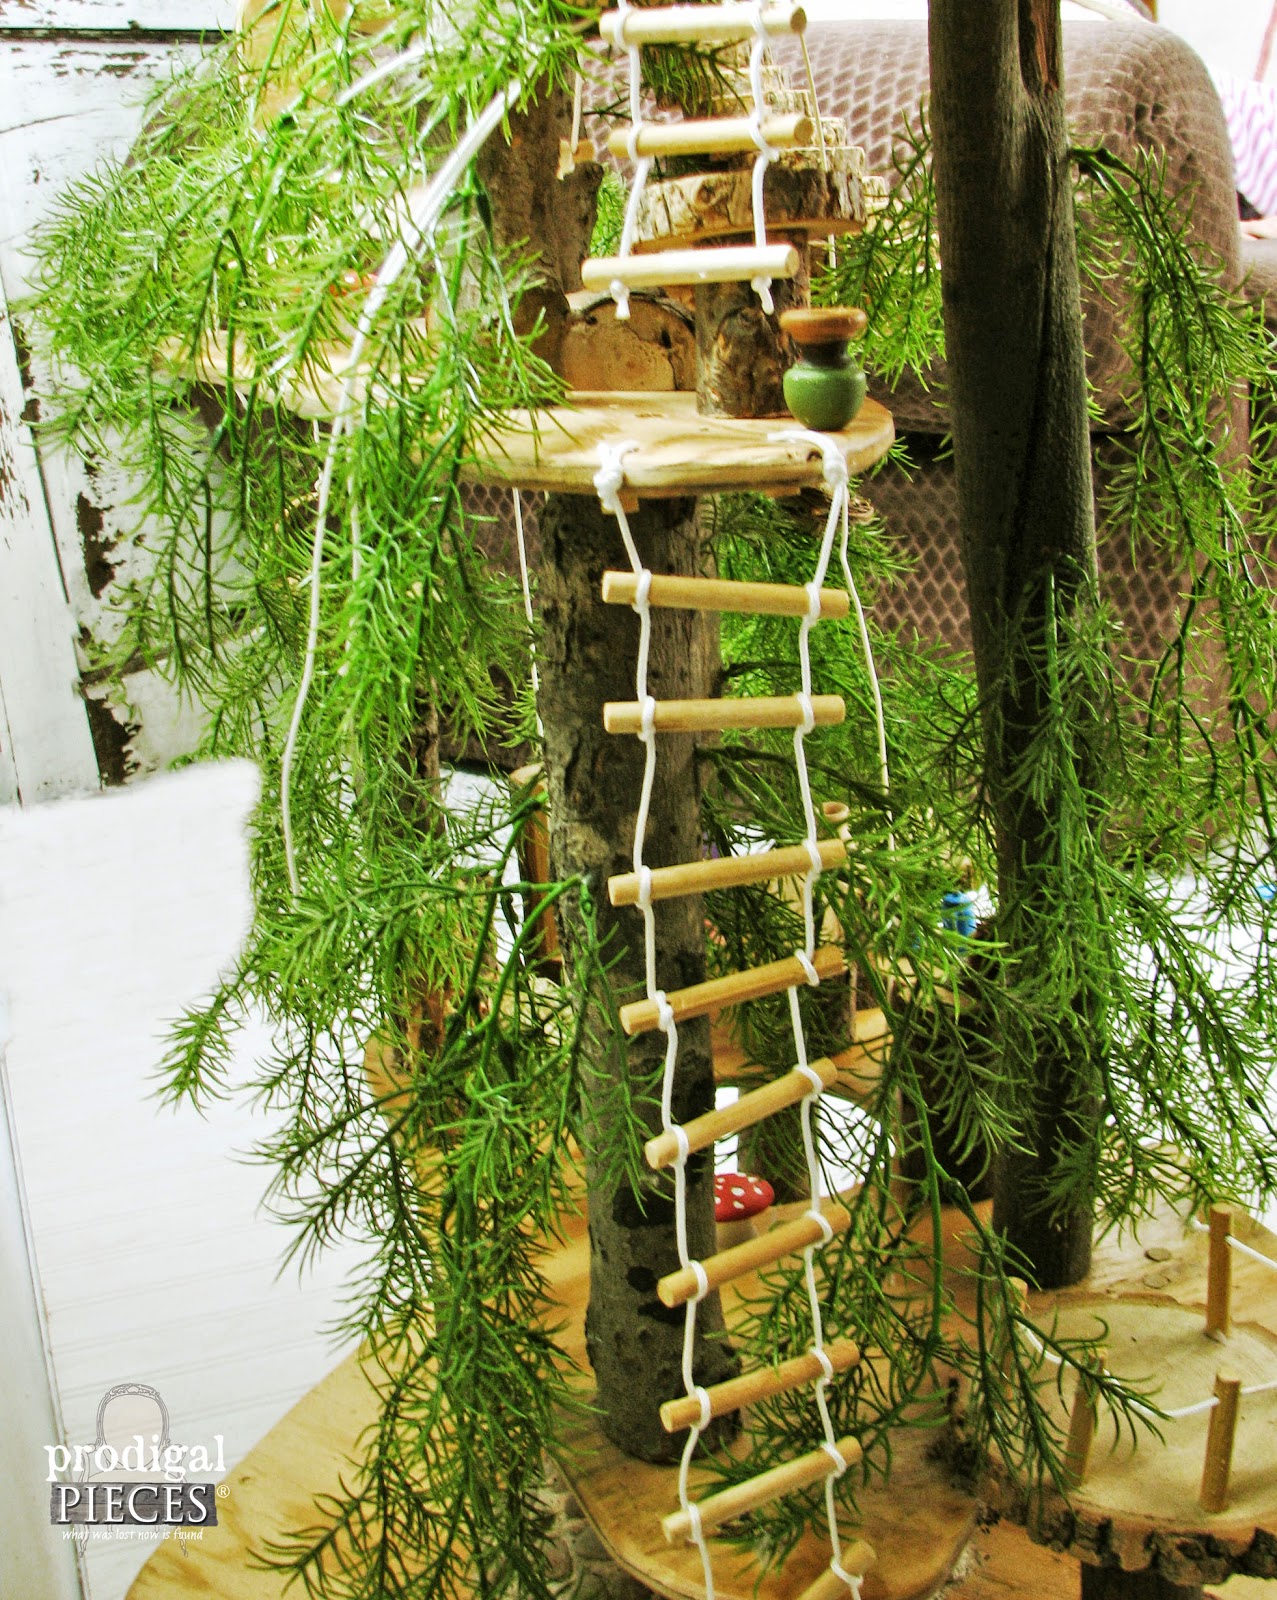 Handmade Rope Ladder for Woodland Treehouse by Prodigal Pieces | prodigalpieces.com